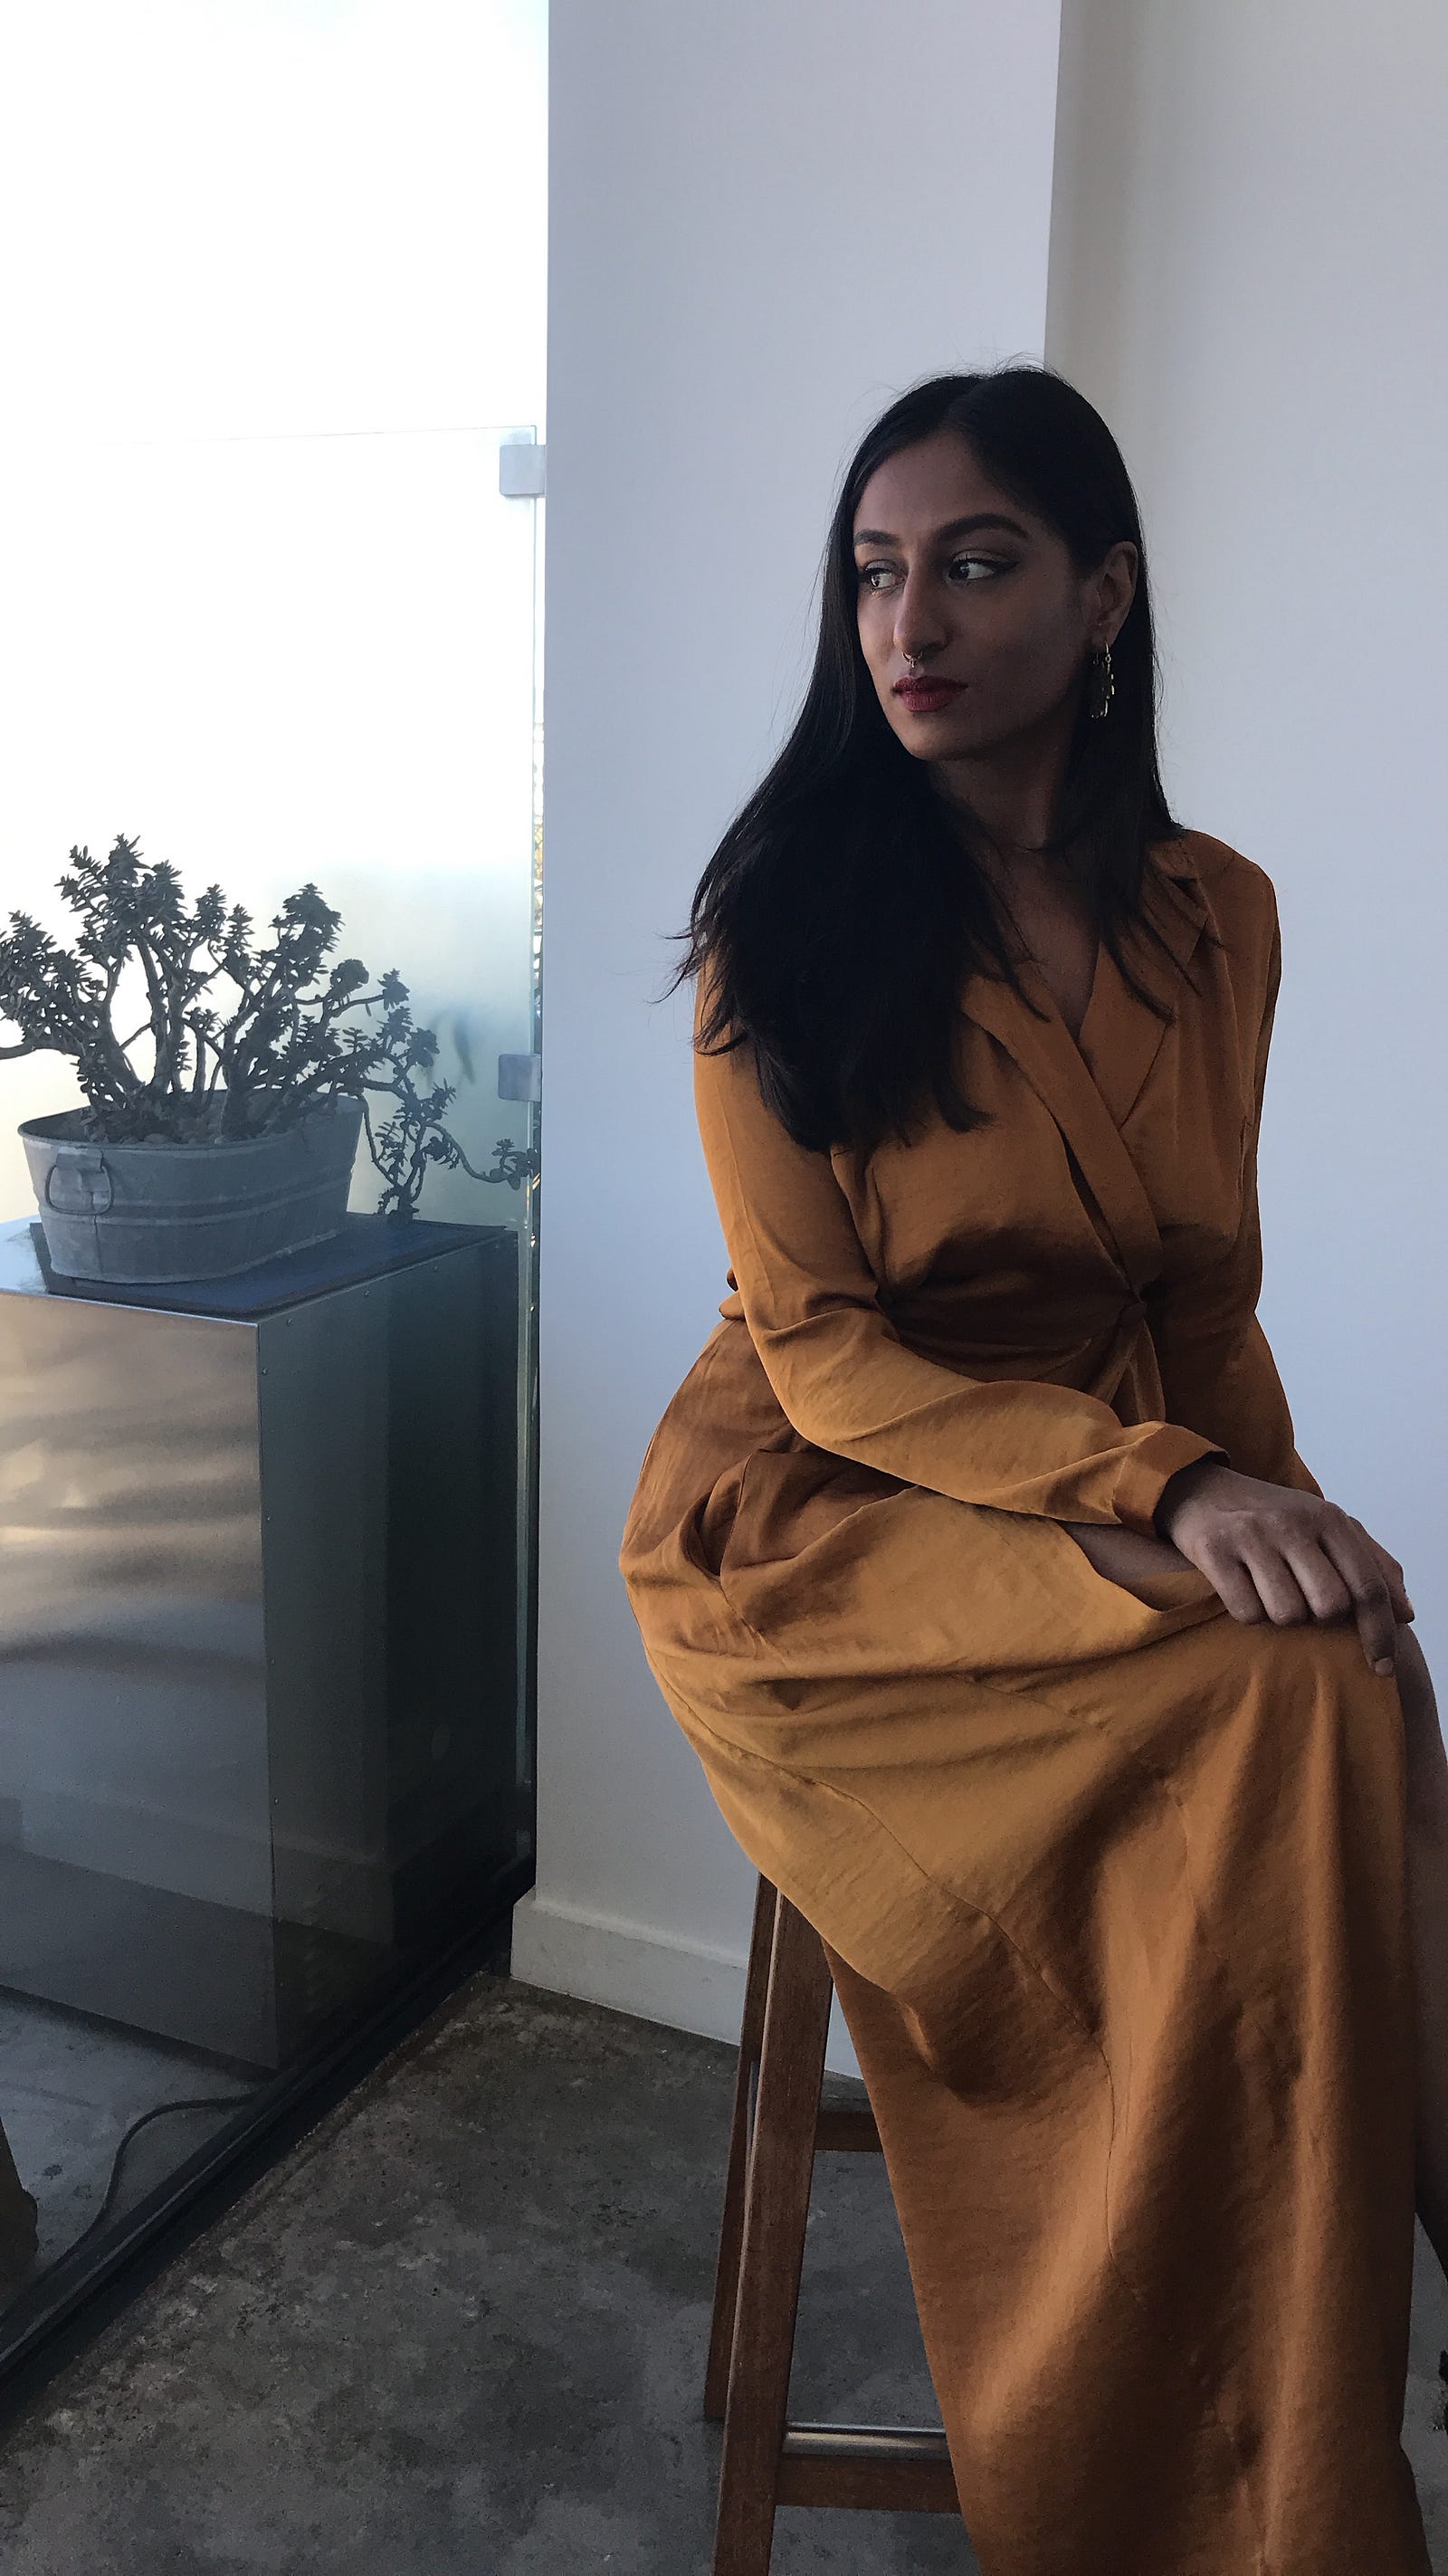 Pavana Reddy, the fierce poet who won our hearts over is wearing the marigold shirt dress by Bastet Noir, photo by: Joshua White